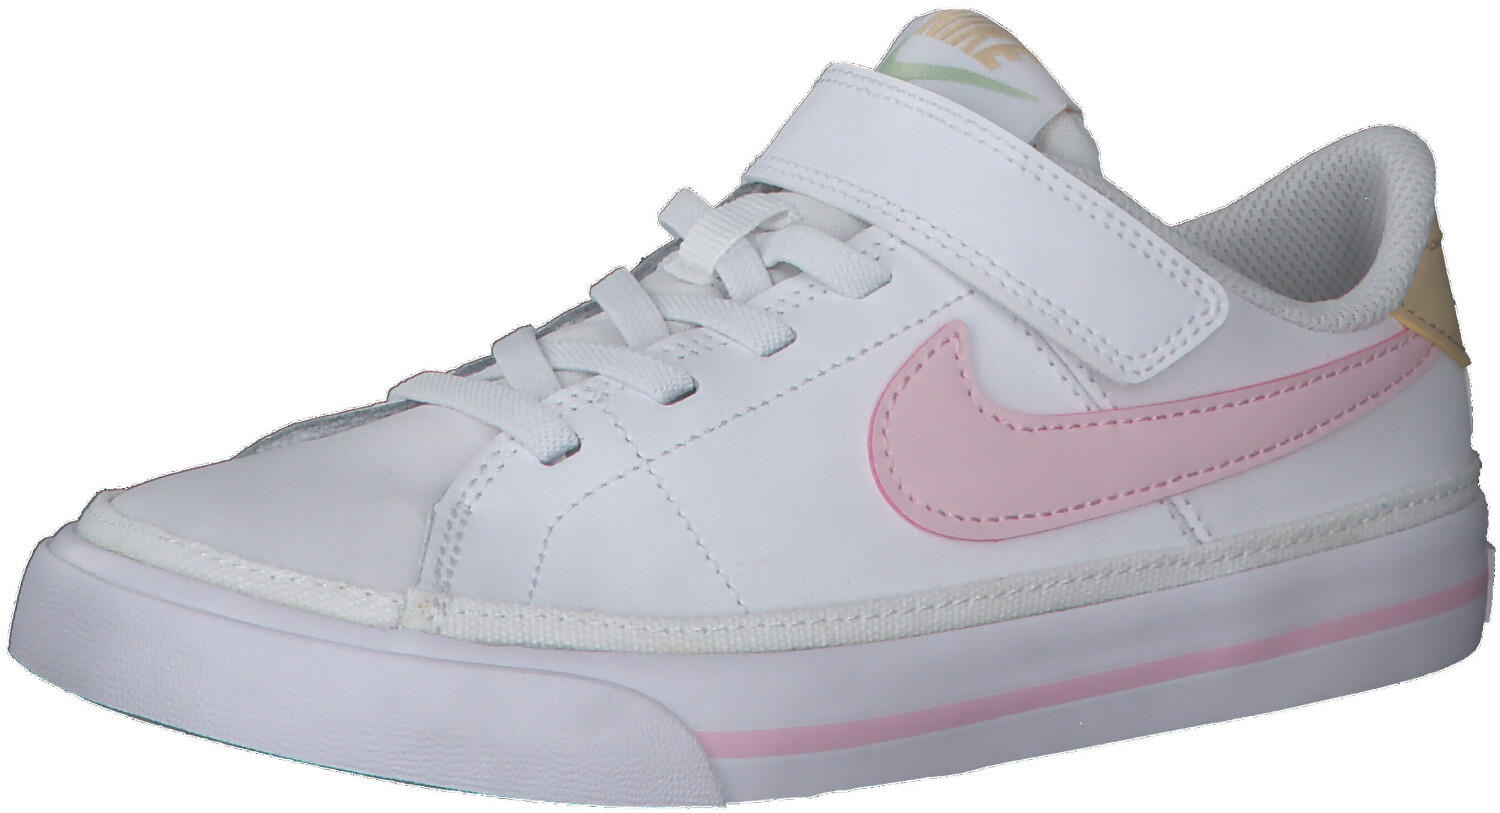 £31.31 Deals white/sesame/honeydew/pink Court Kids – Small Buy (Today) on foam from Best Legacy Nike